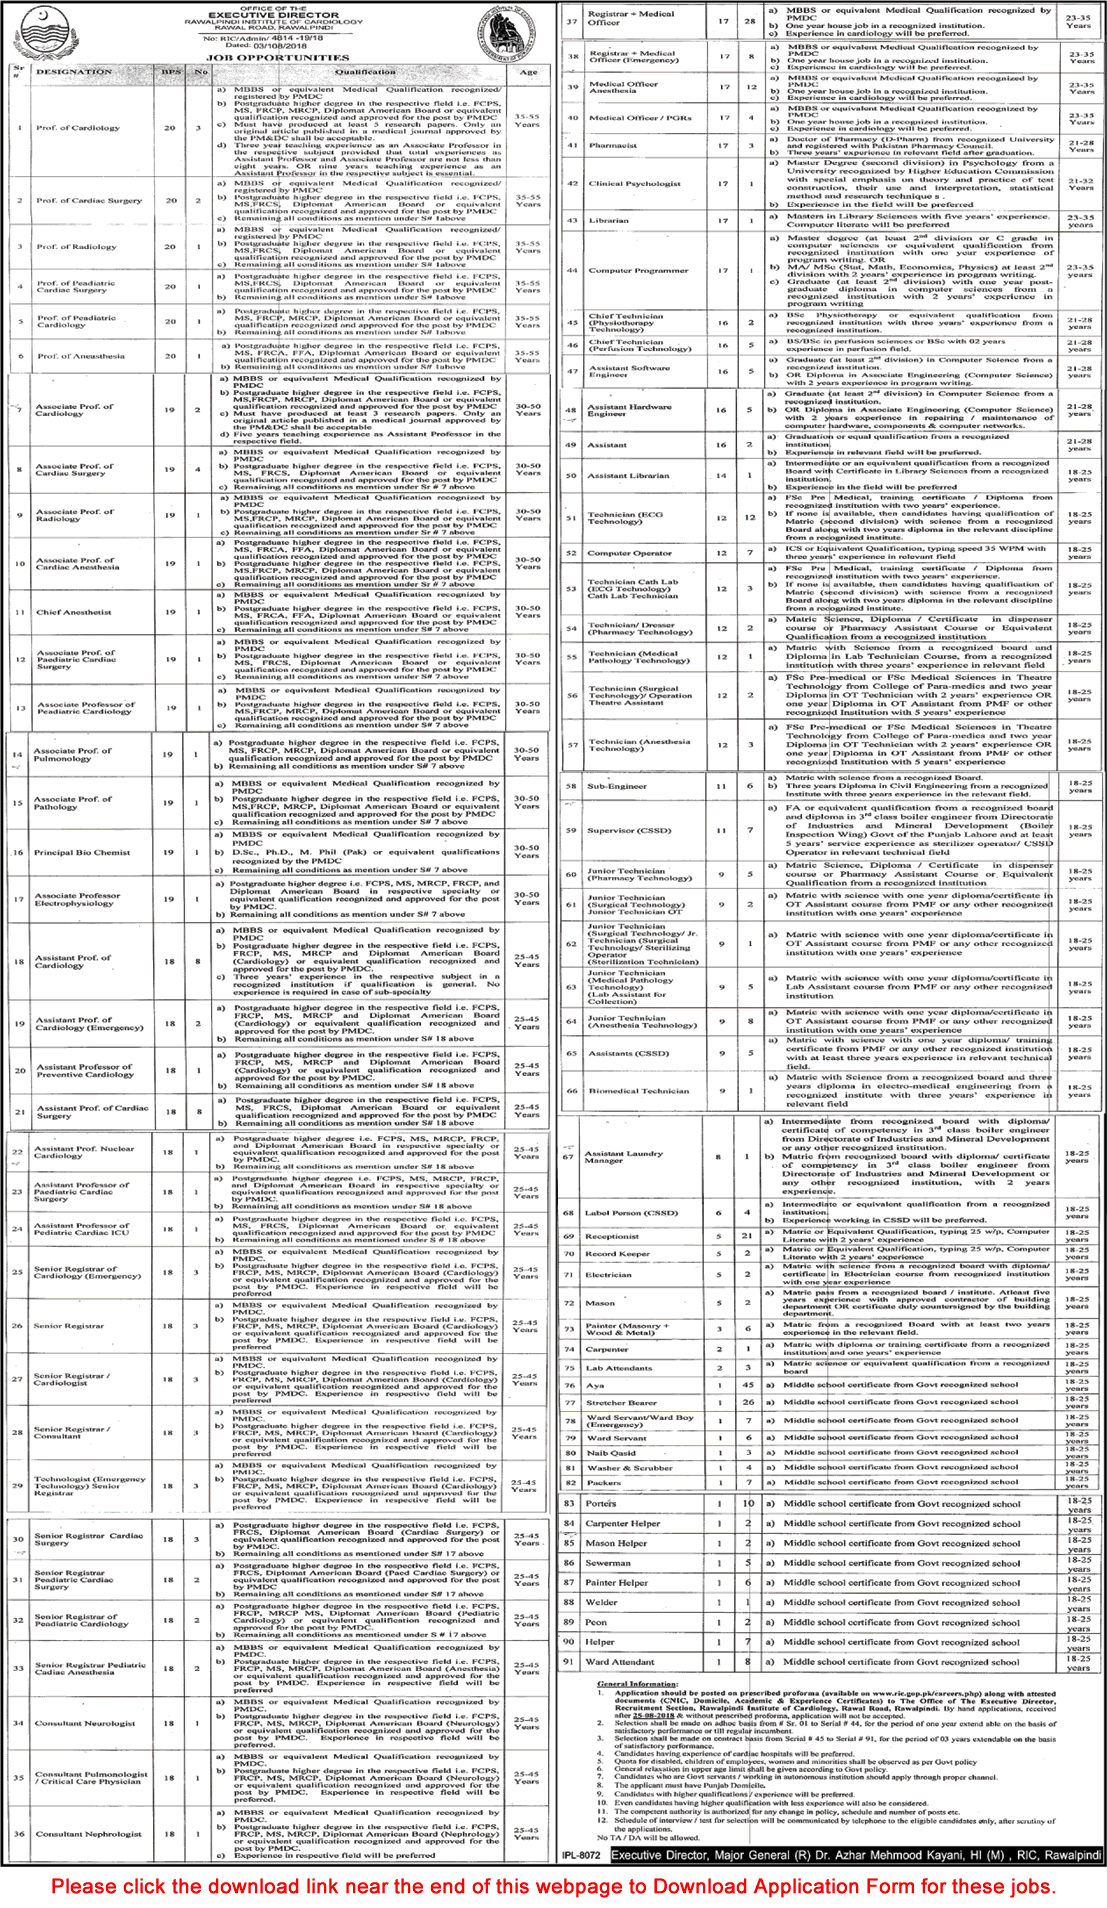 Rawalpindi Institute of Cardiology Jobs 2018 August Application Form RIC Hospital Latest